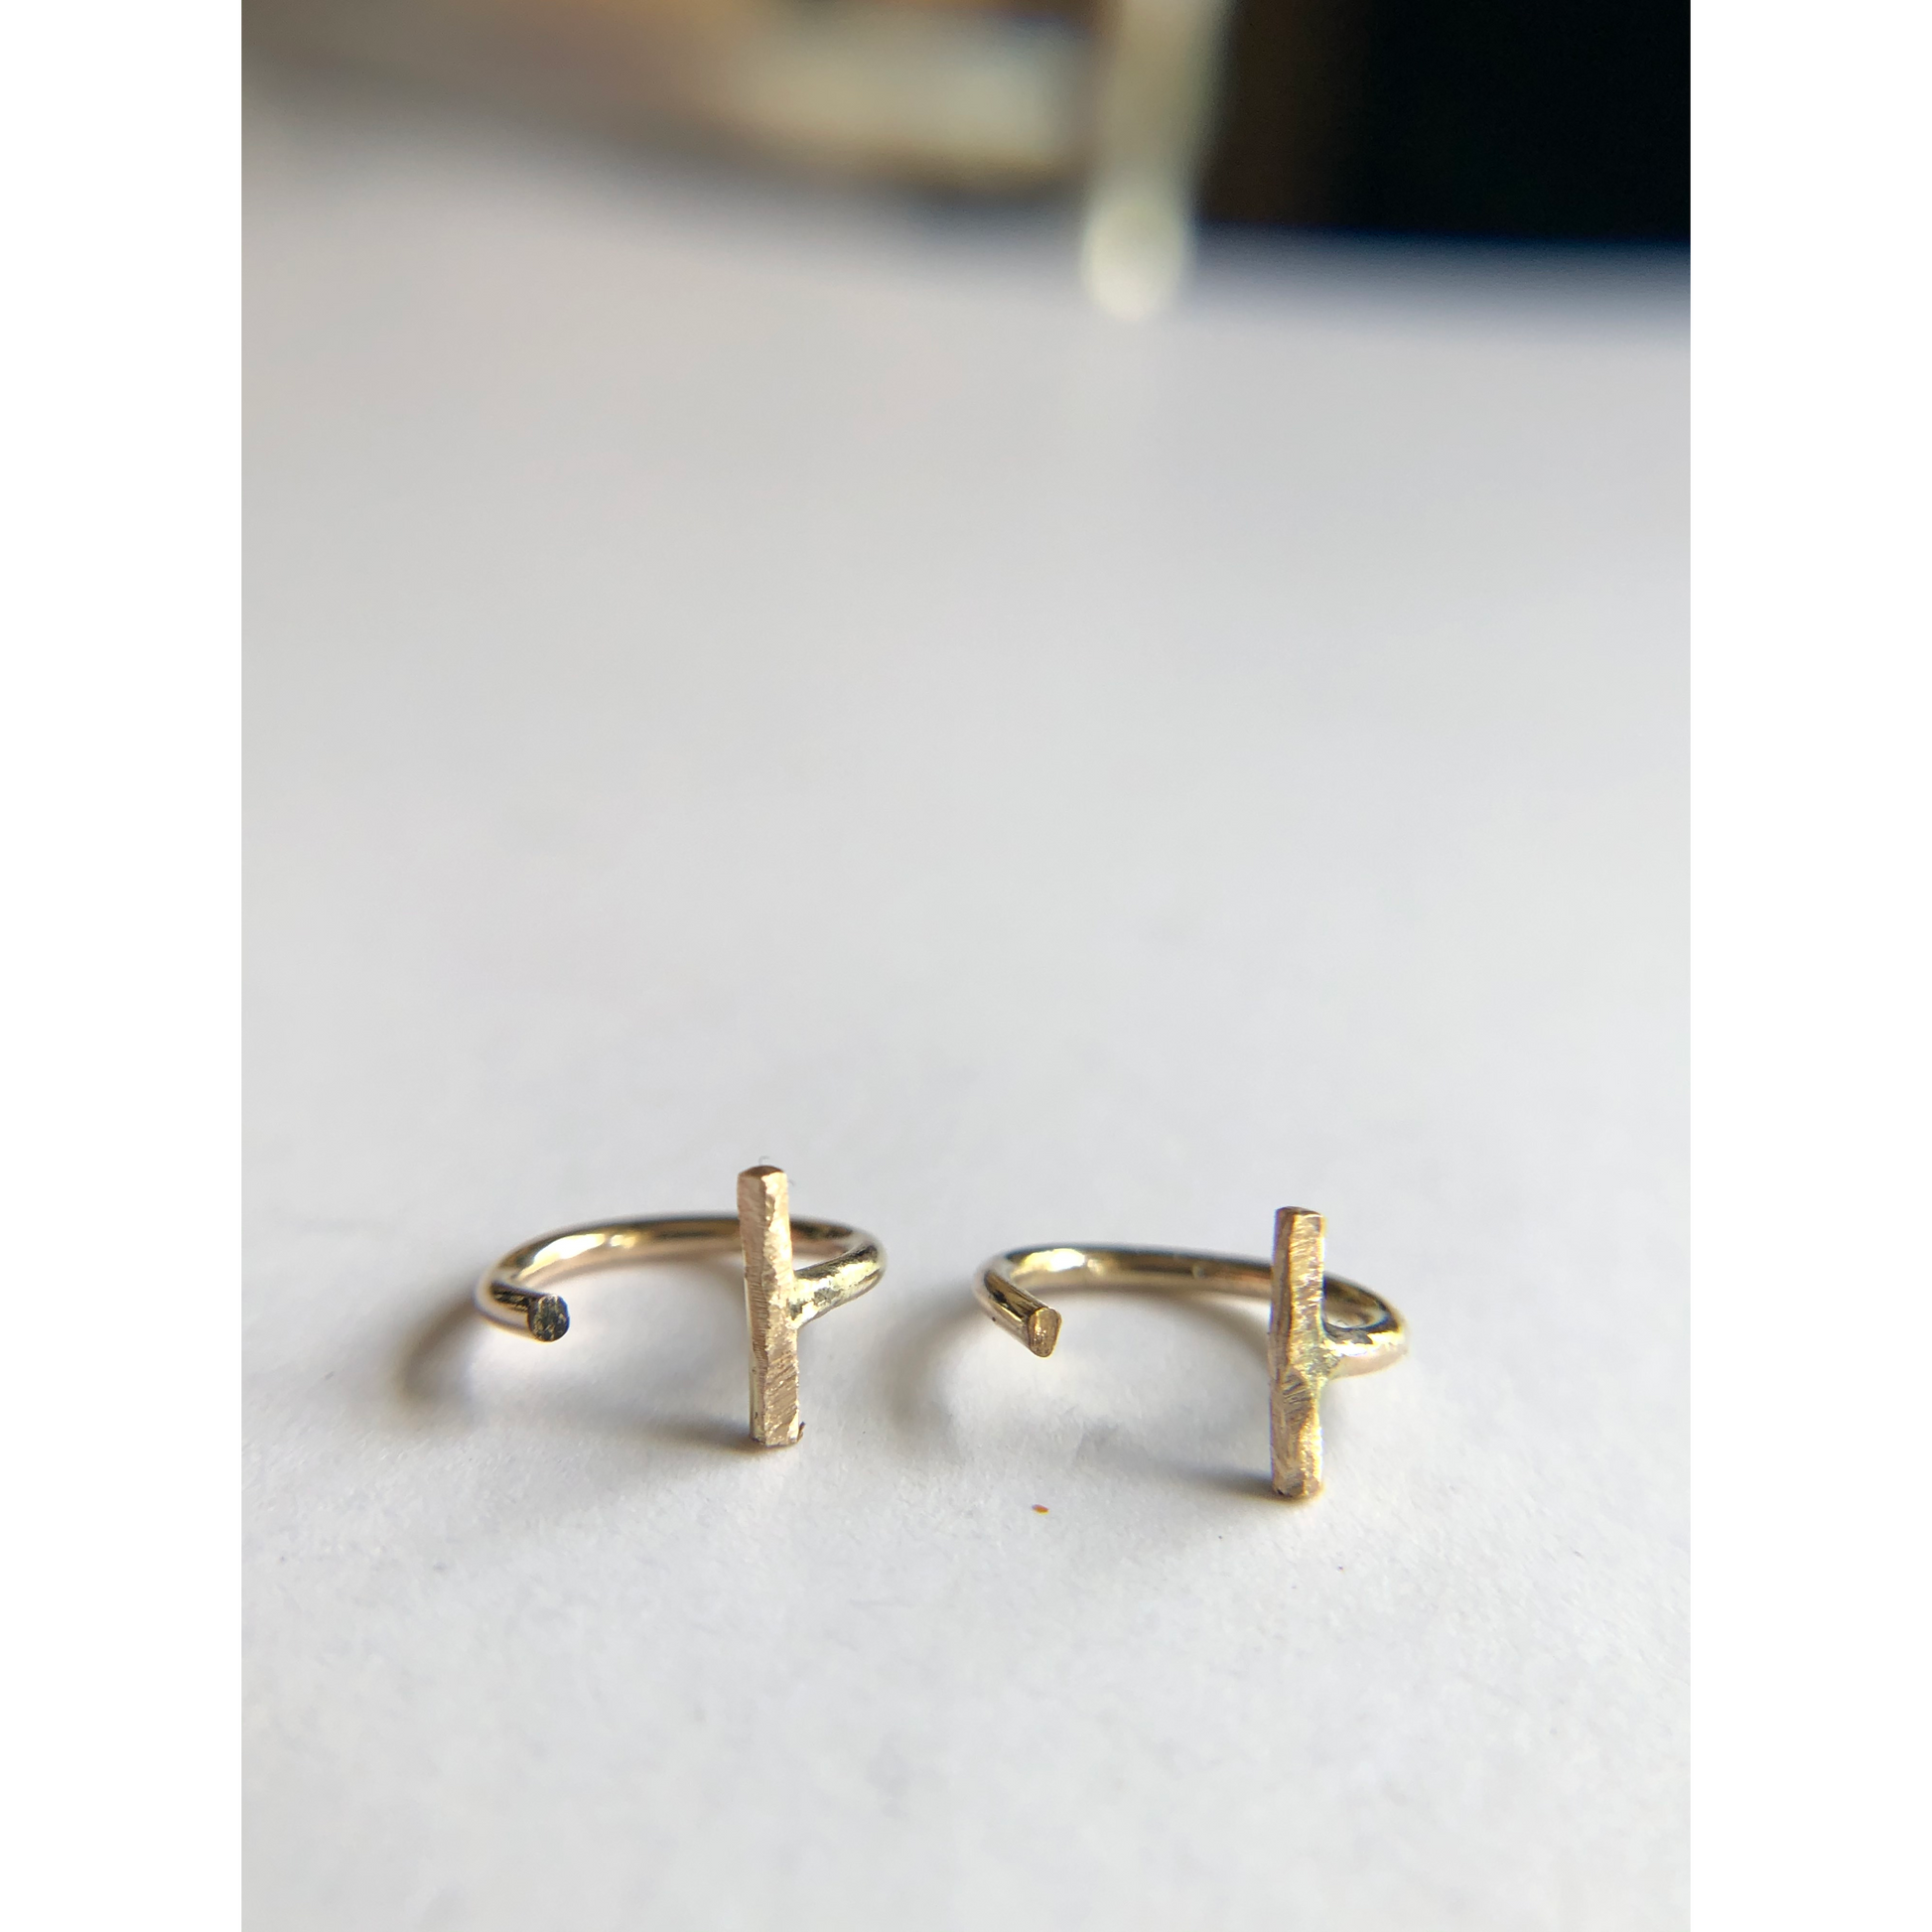 small gold half hoops with bar on one side (ear side) hugs close to ears